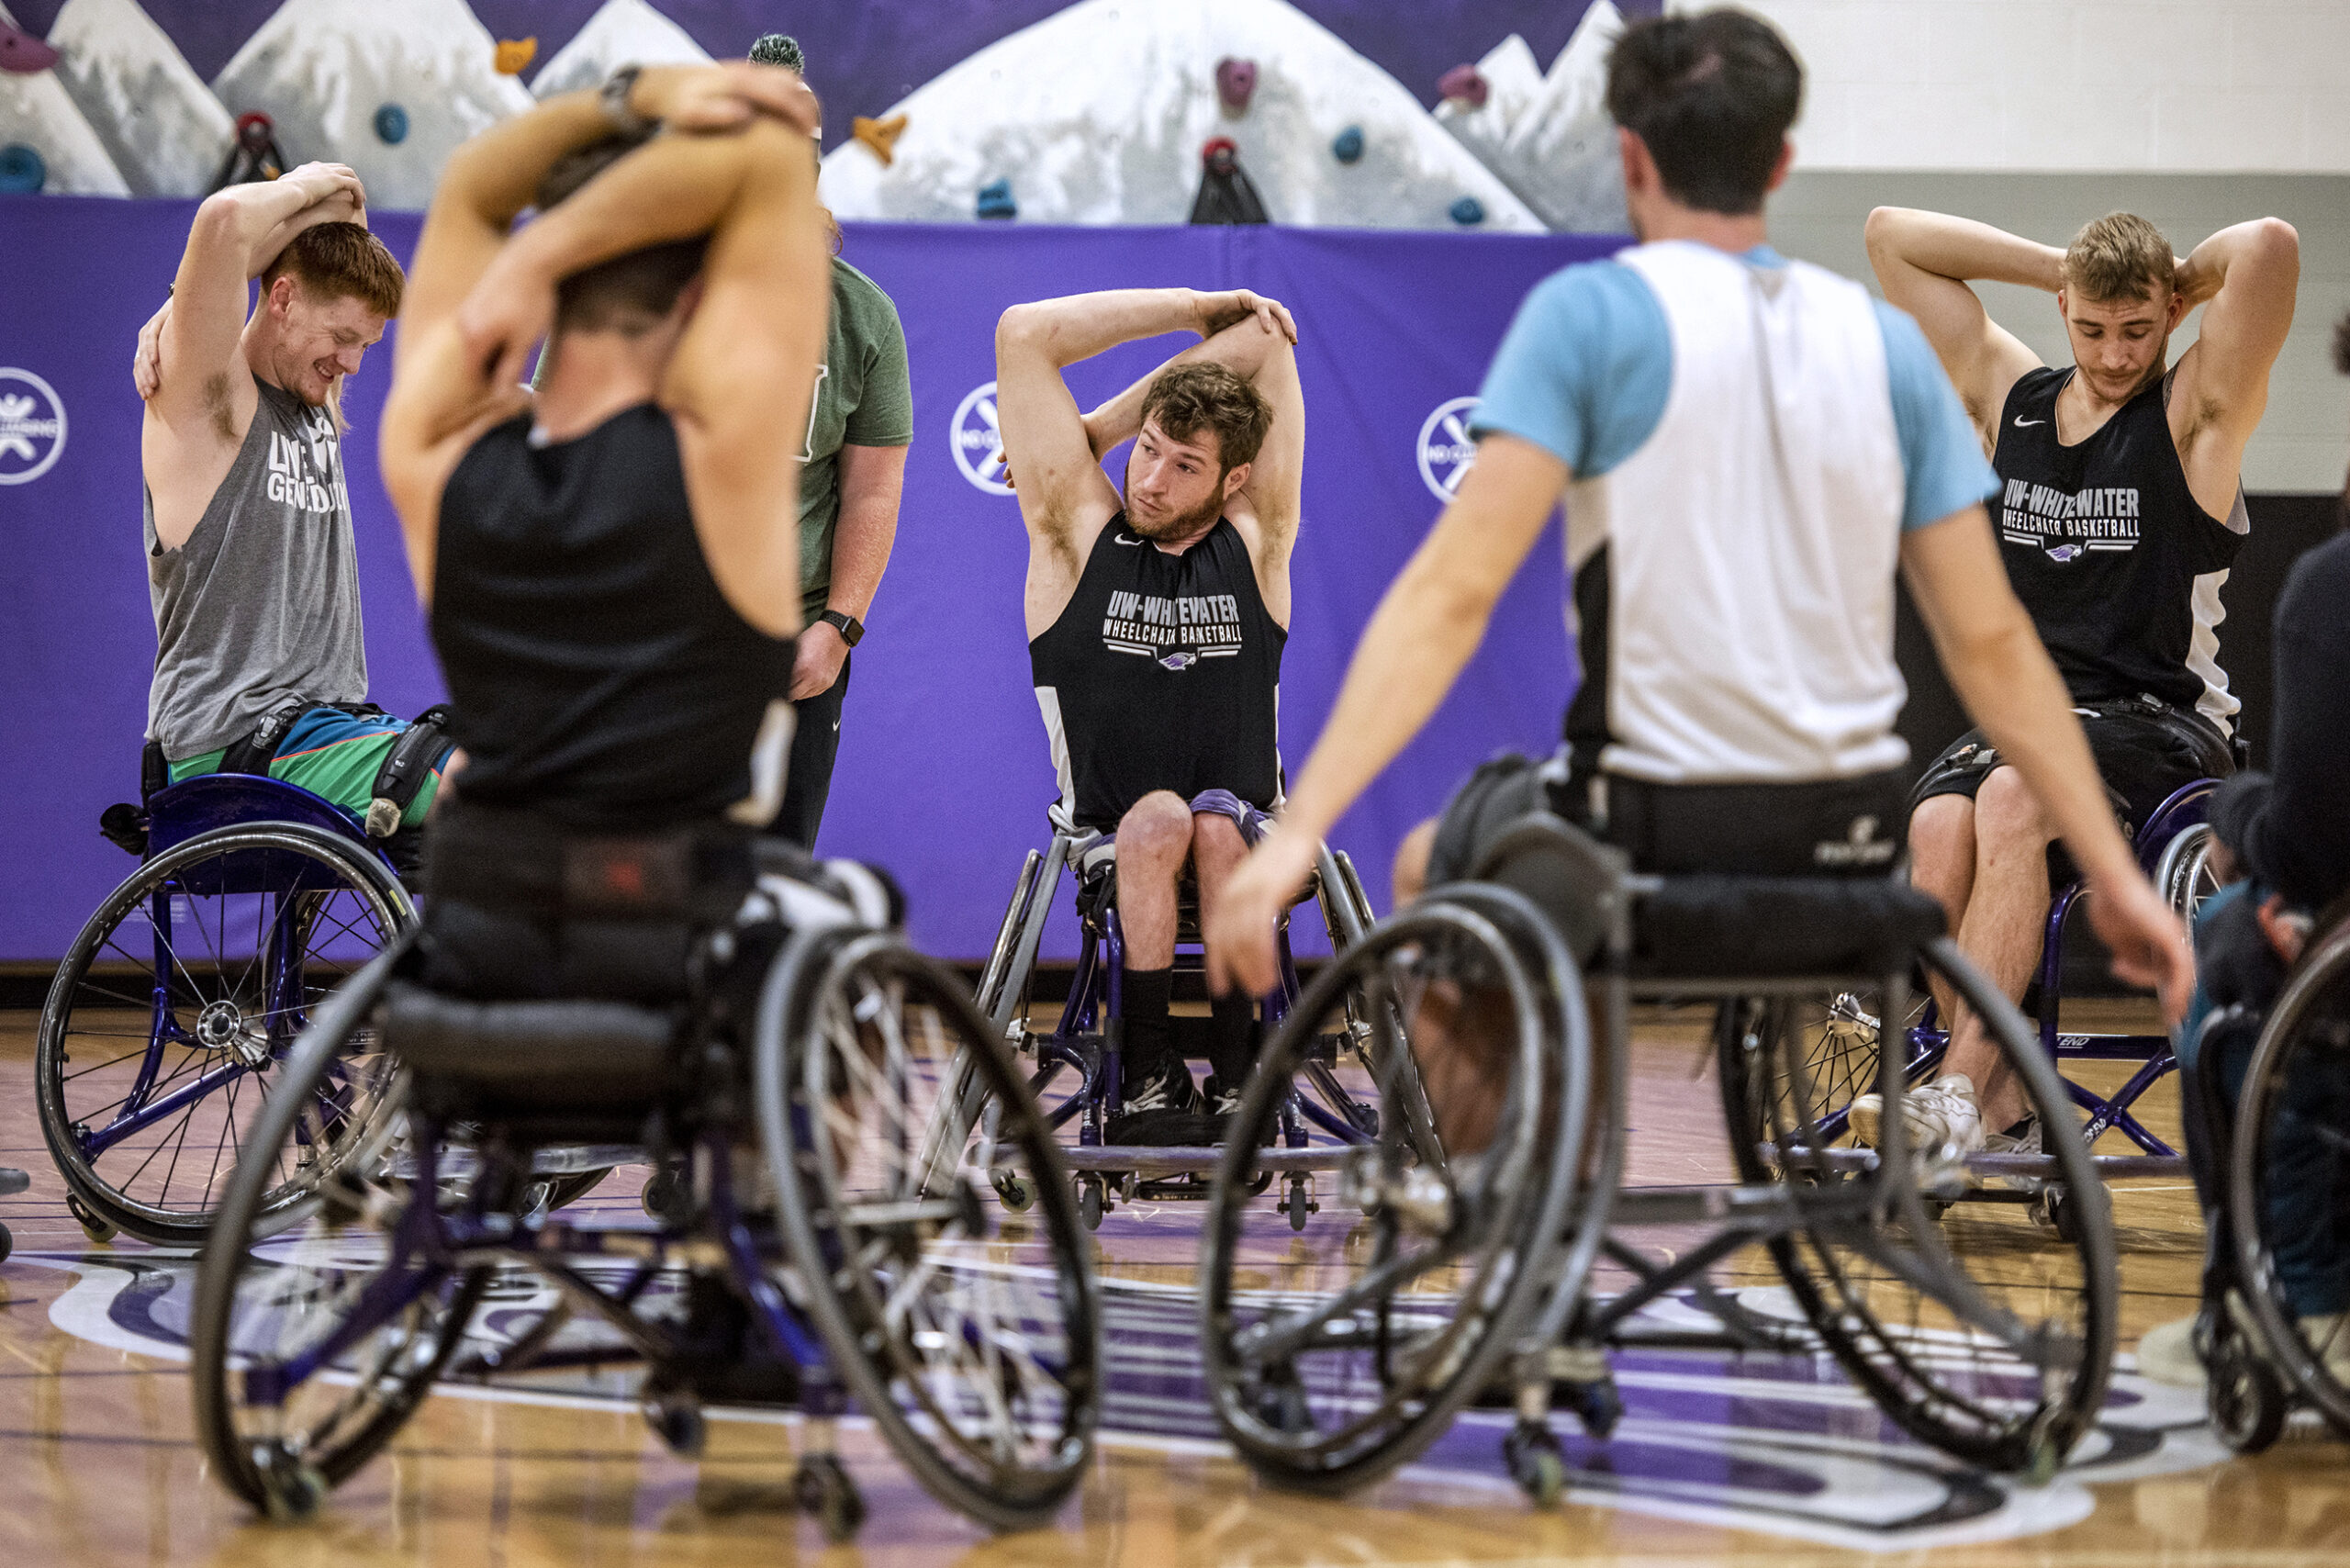 Men's wheelchair basketball players stretch their arms.